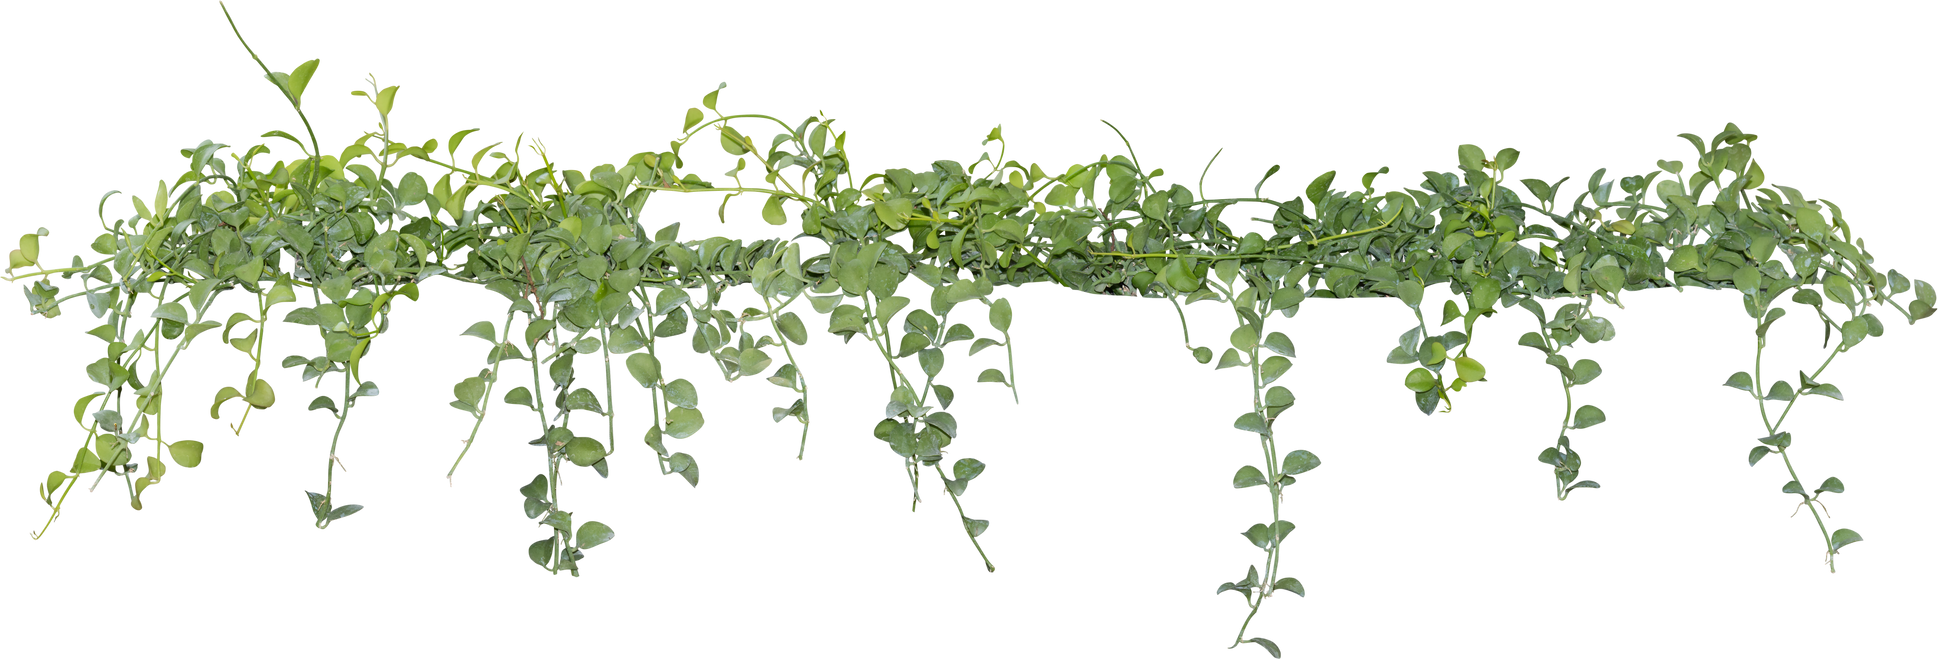 Vine Plant with Green Leaves